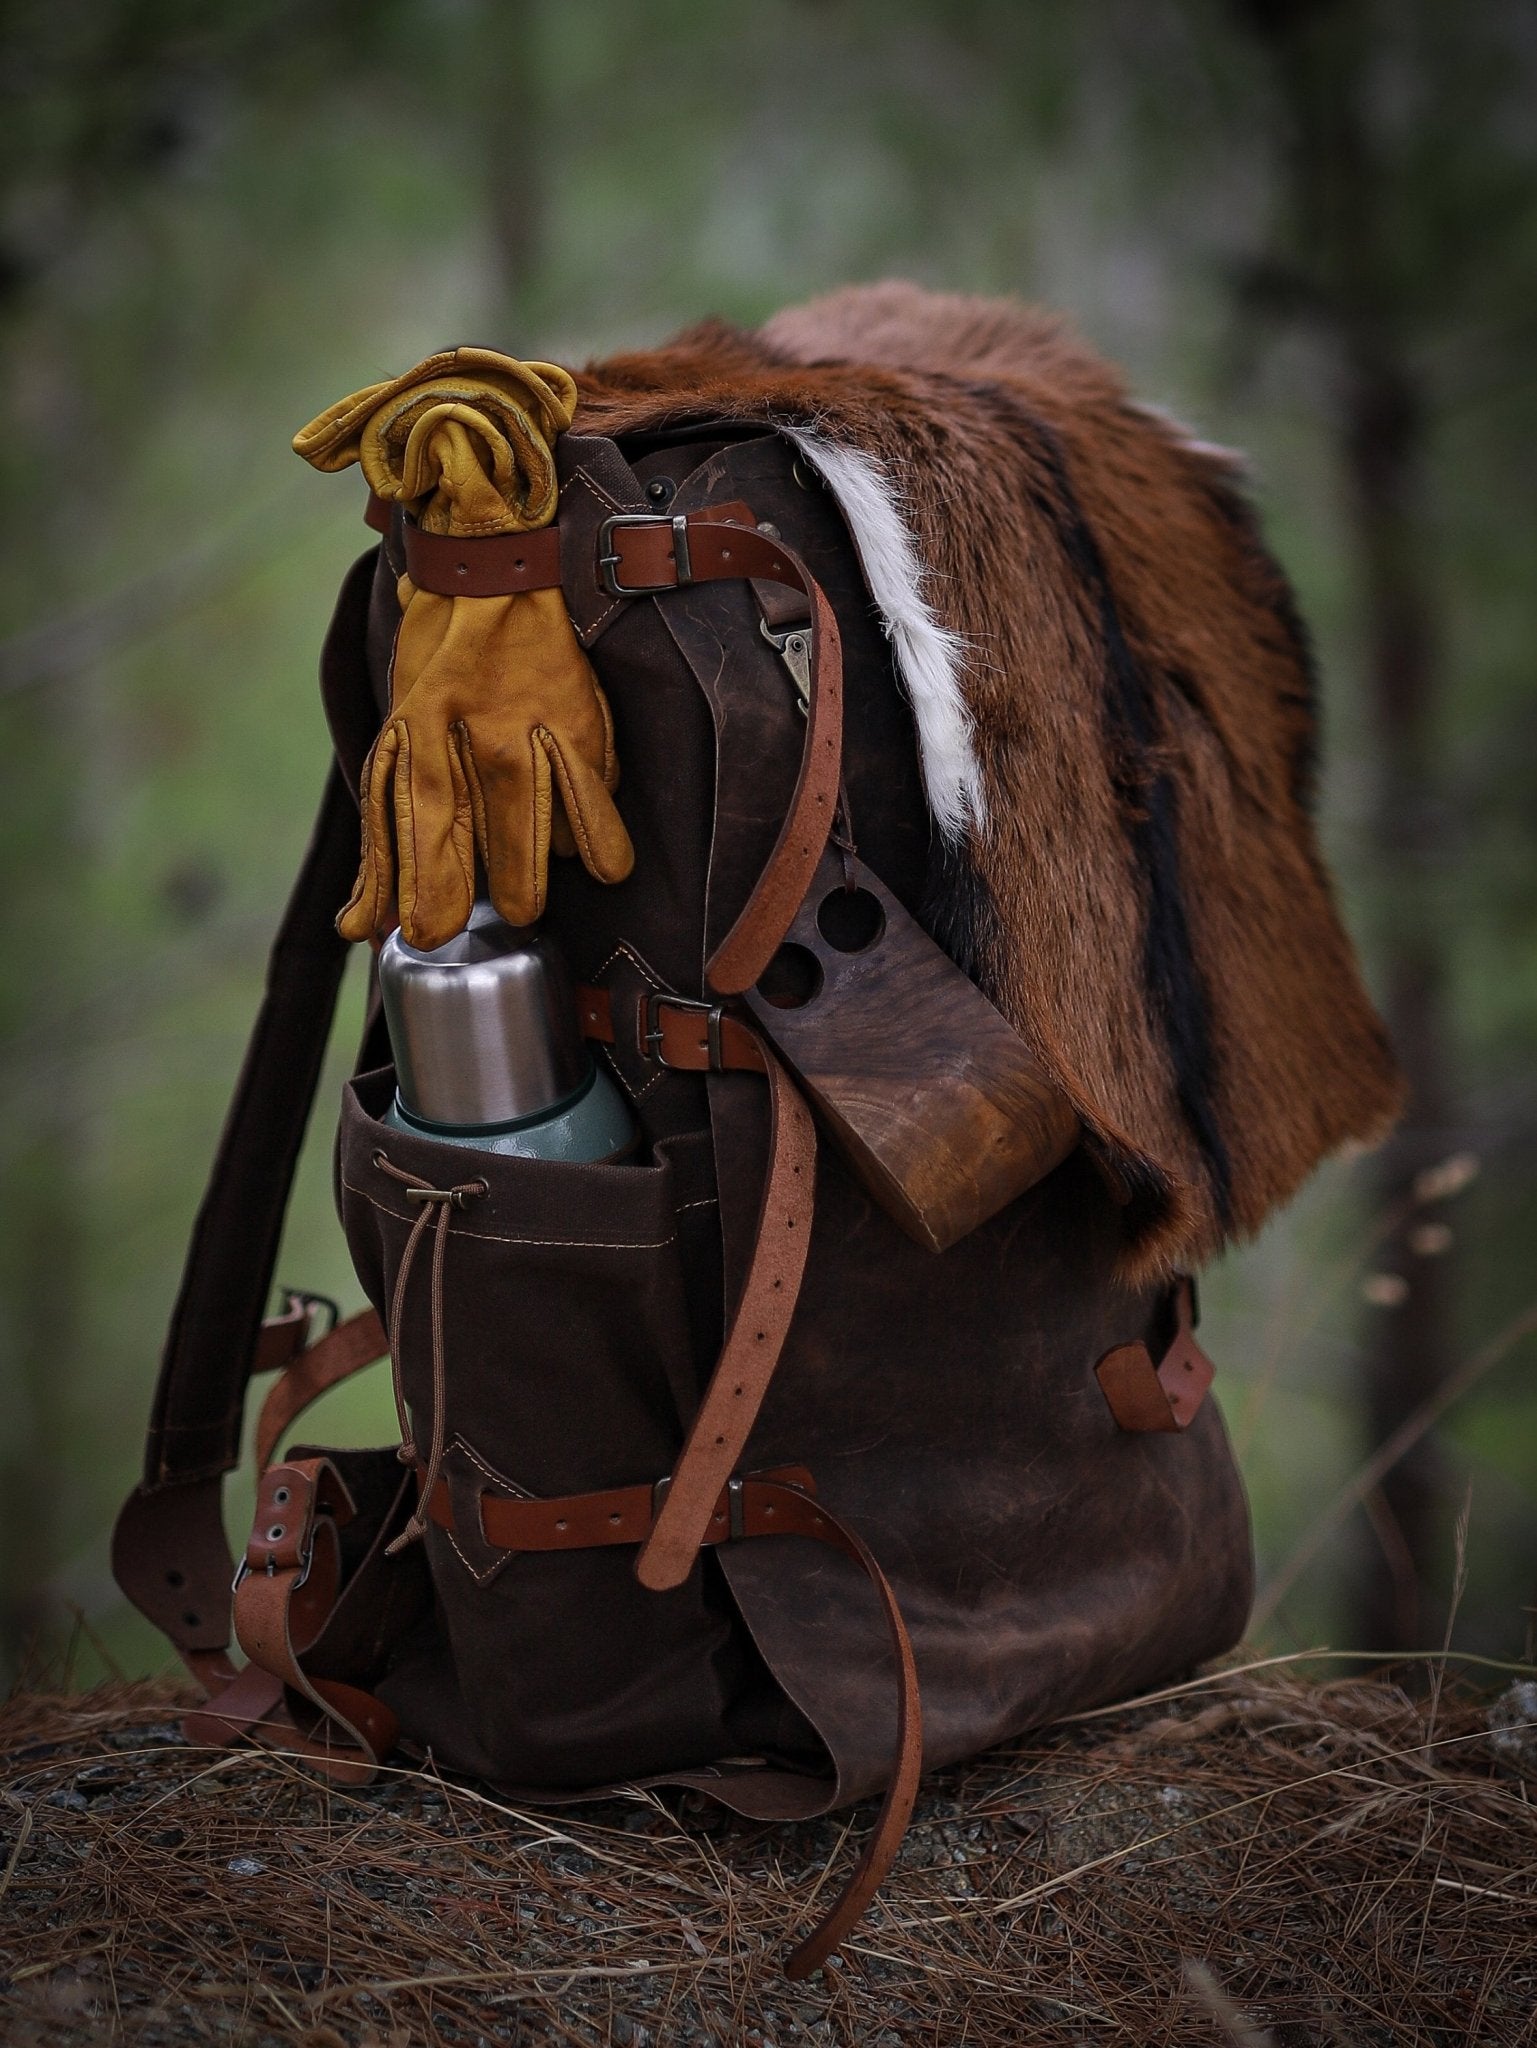 Model Name : Alexandria Template | Custom Leather-Canvas Backpack with Fur Flap, You can Redesign-Customize the item | 30 Liter to 80 Liter Options bushcraft - camping - hiking backpack 99percenthandmade   